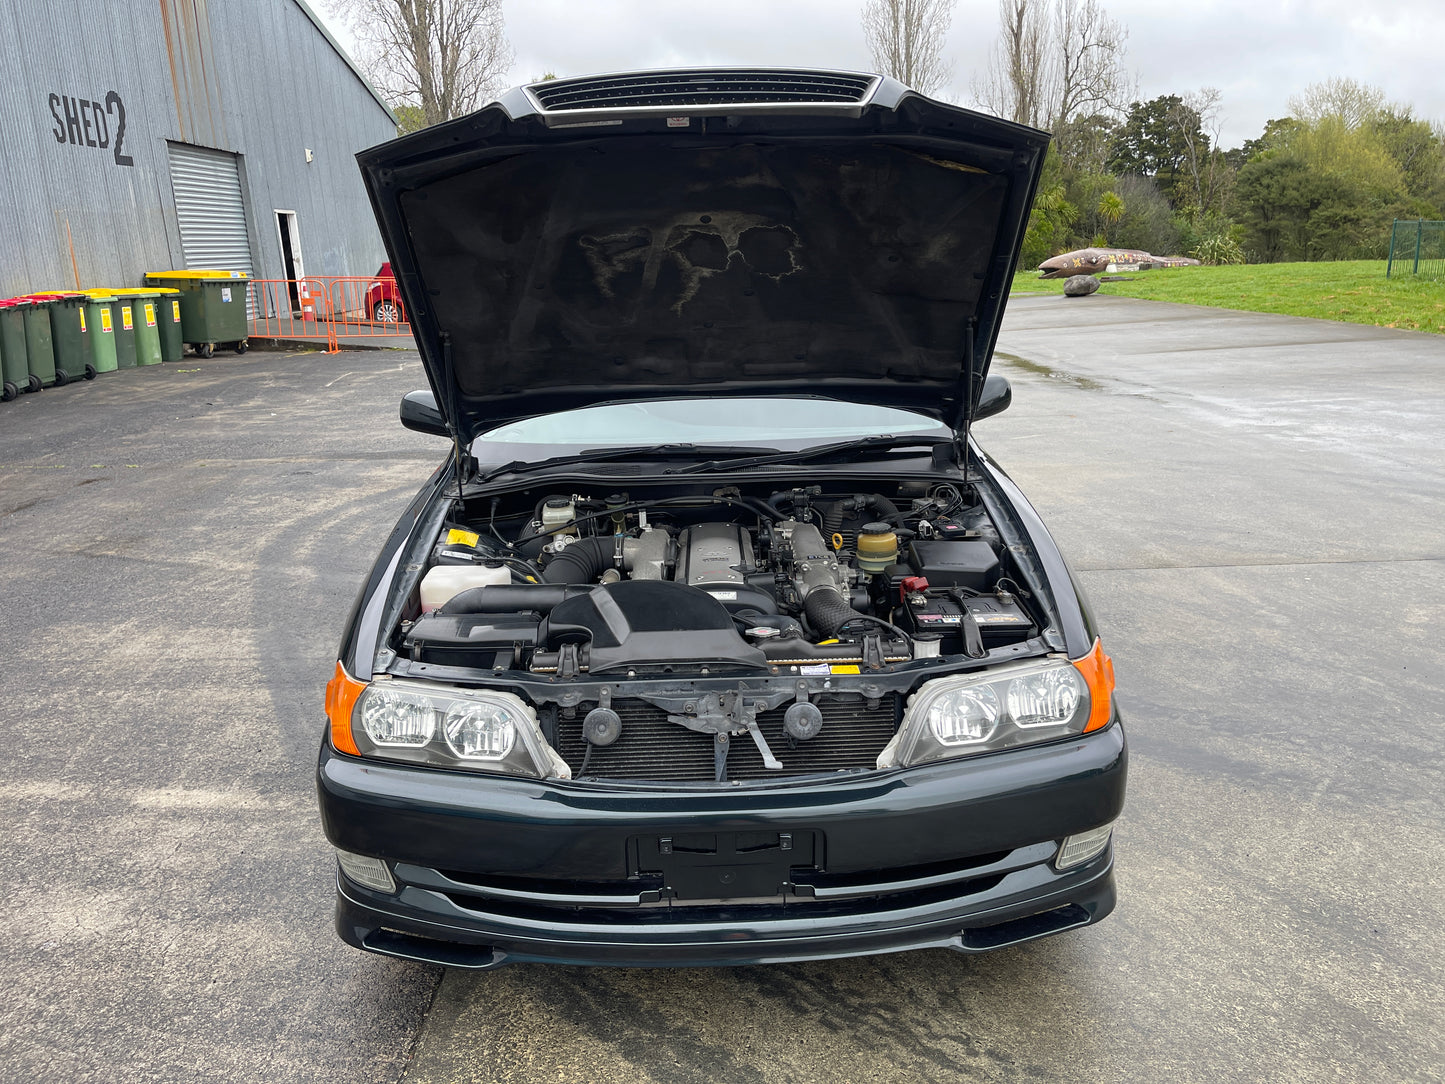 Toyota Chaser Factory Manual Turbo - 1998